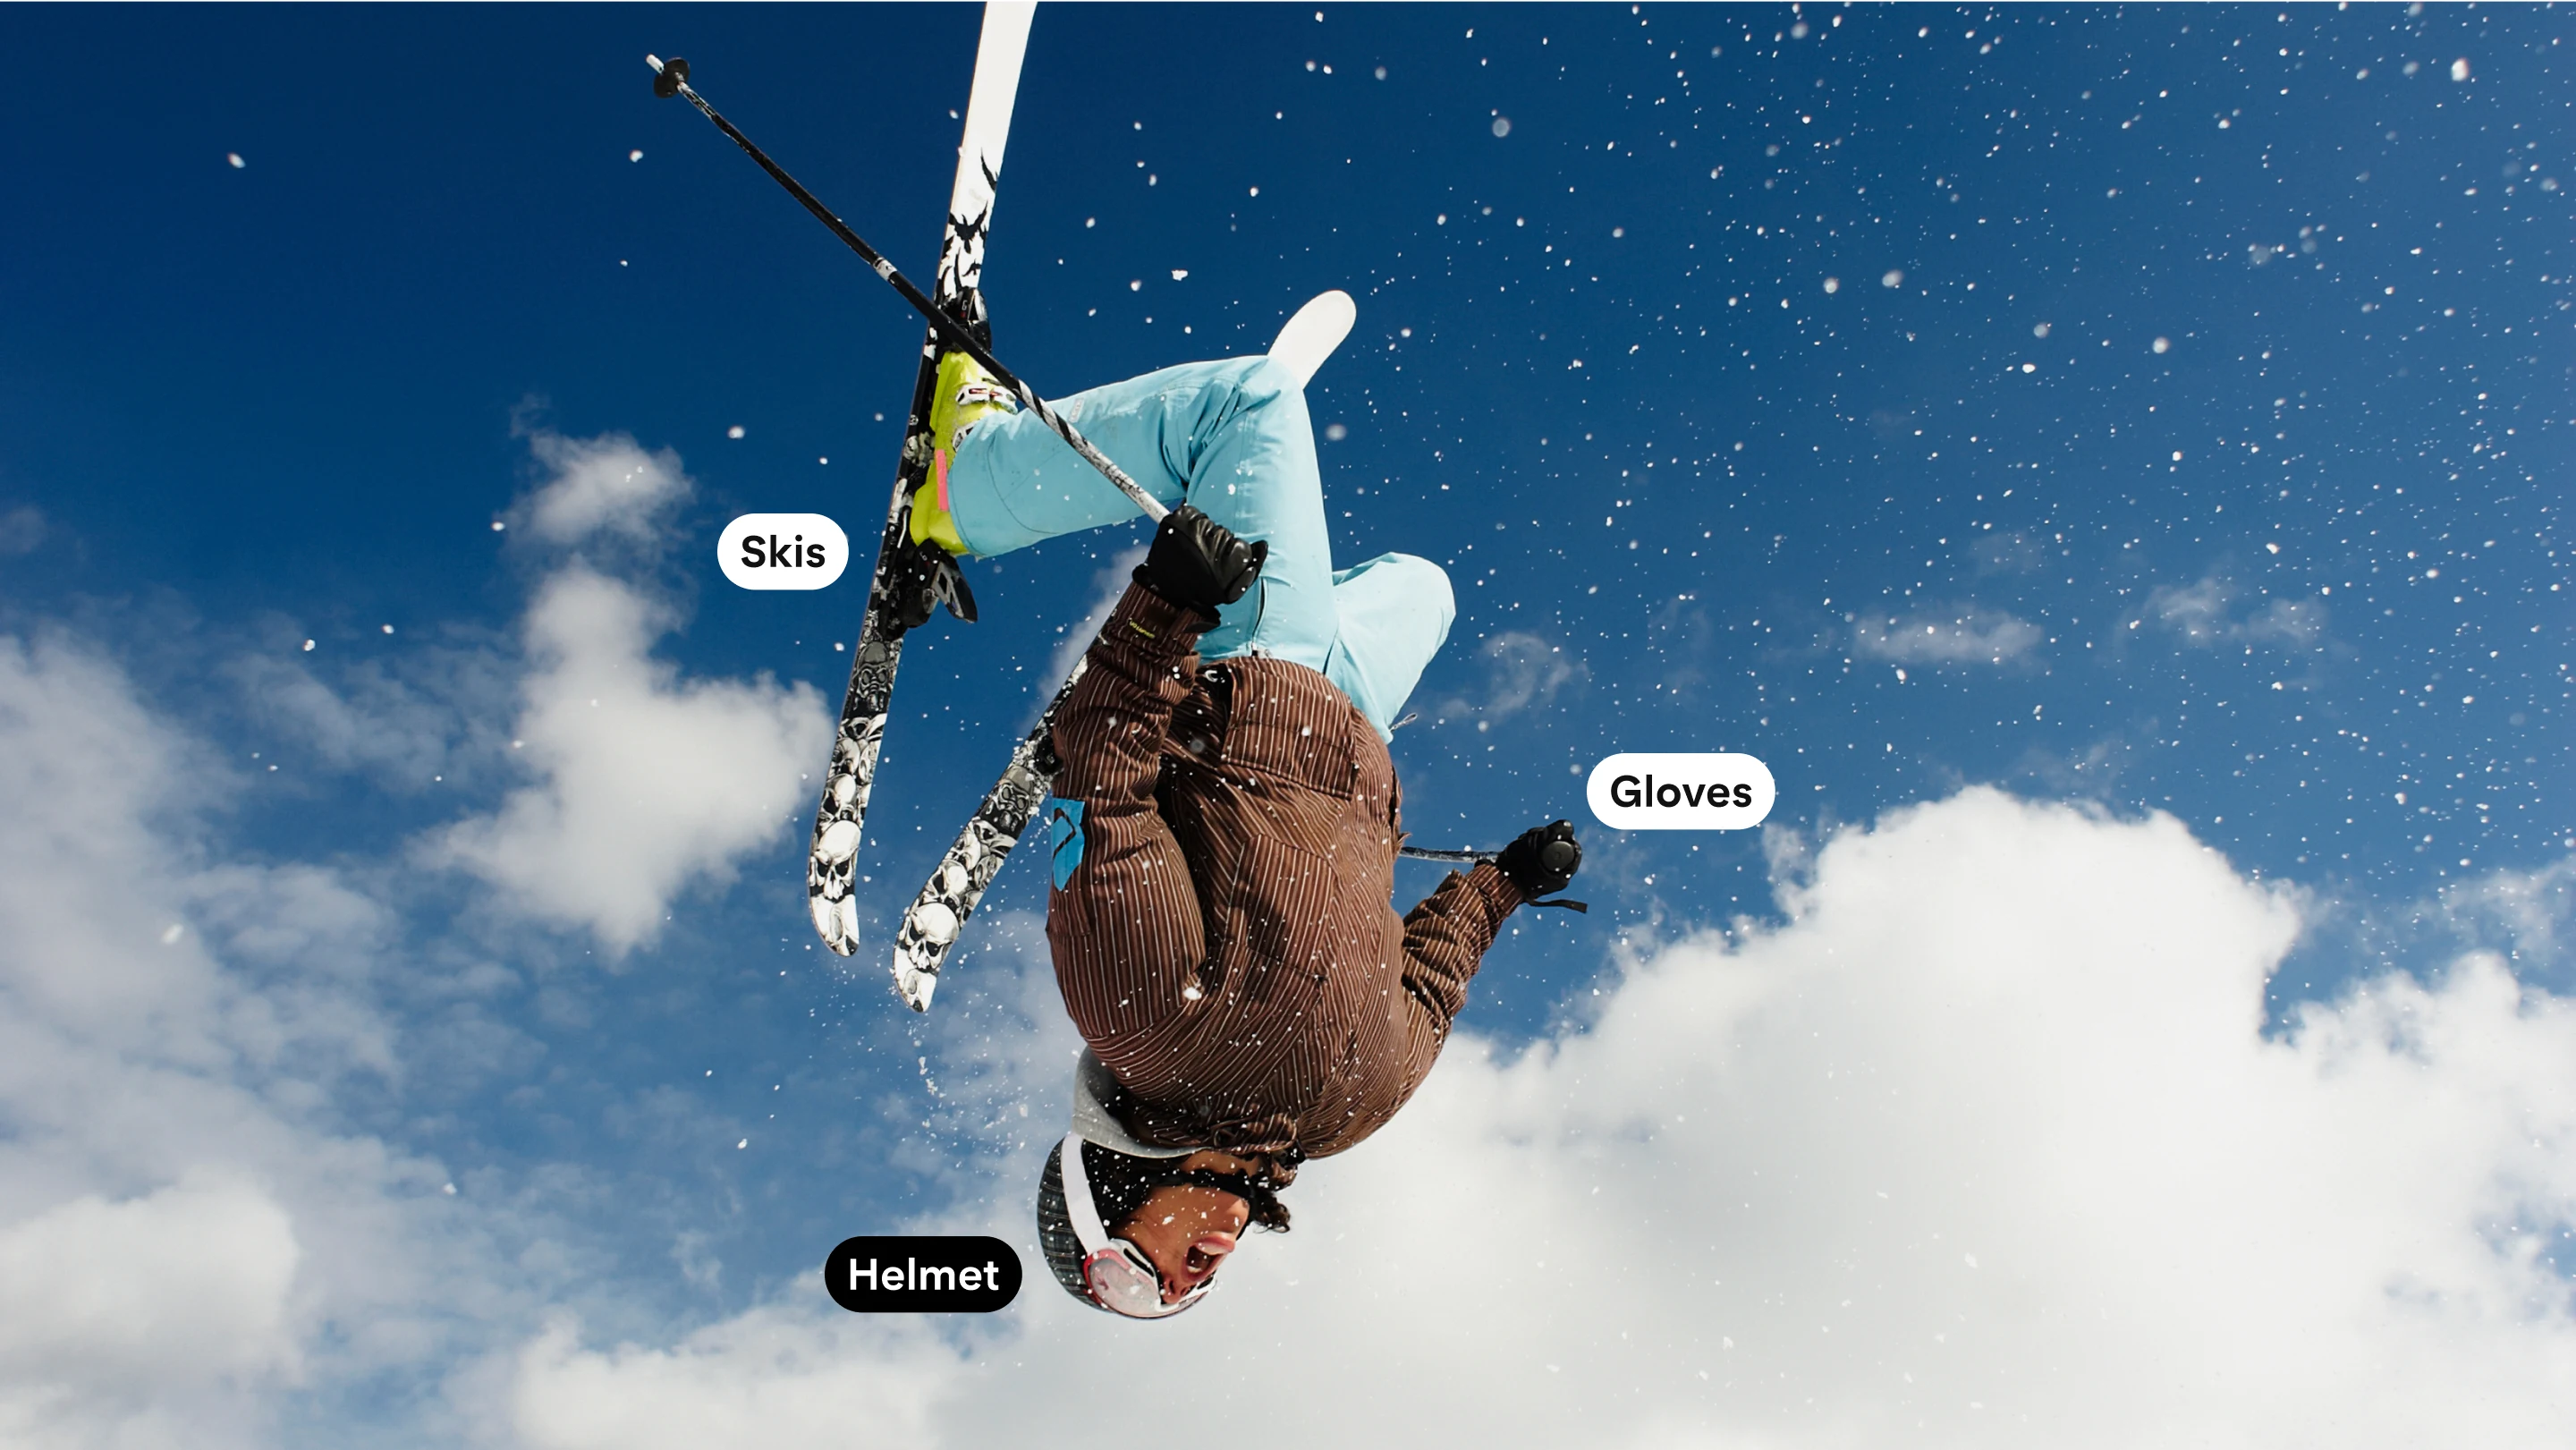 Full width image featuring a woman flipping upside down in full snow gear and skis.